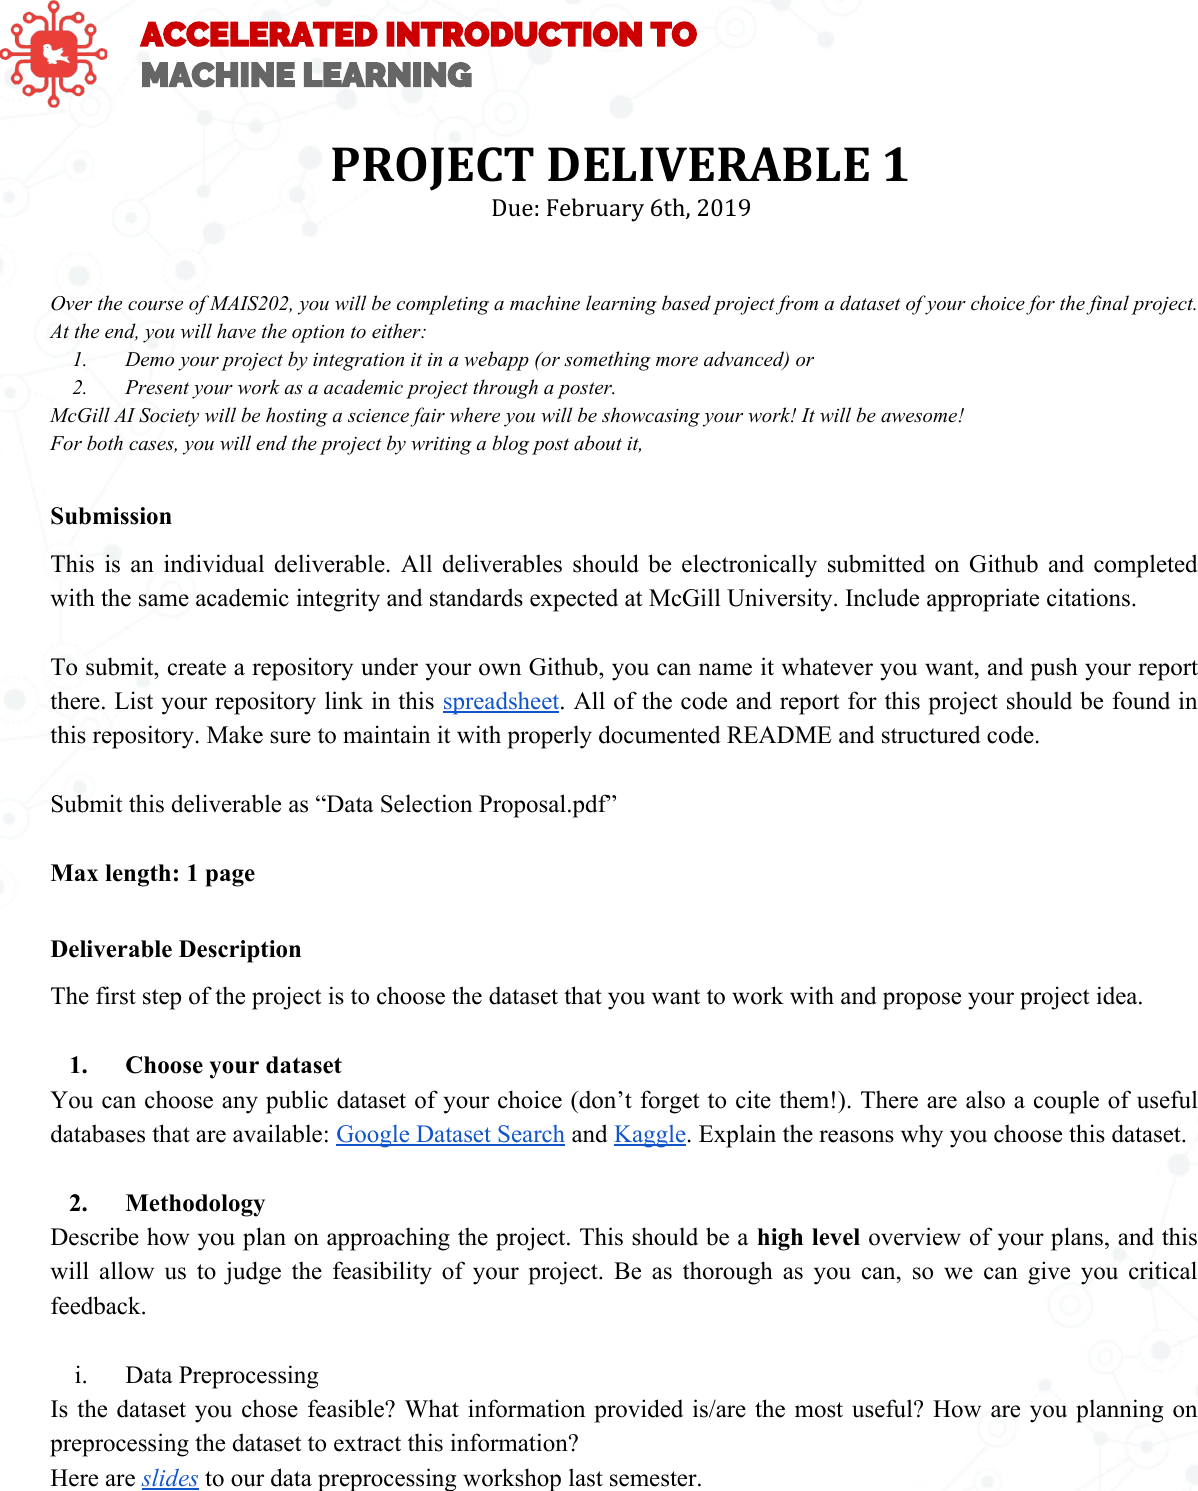 Page 1 of 2 - Deliverable1 Instructions